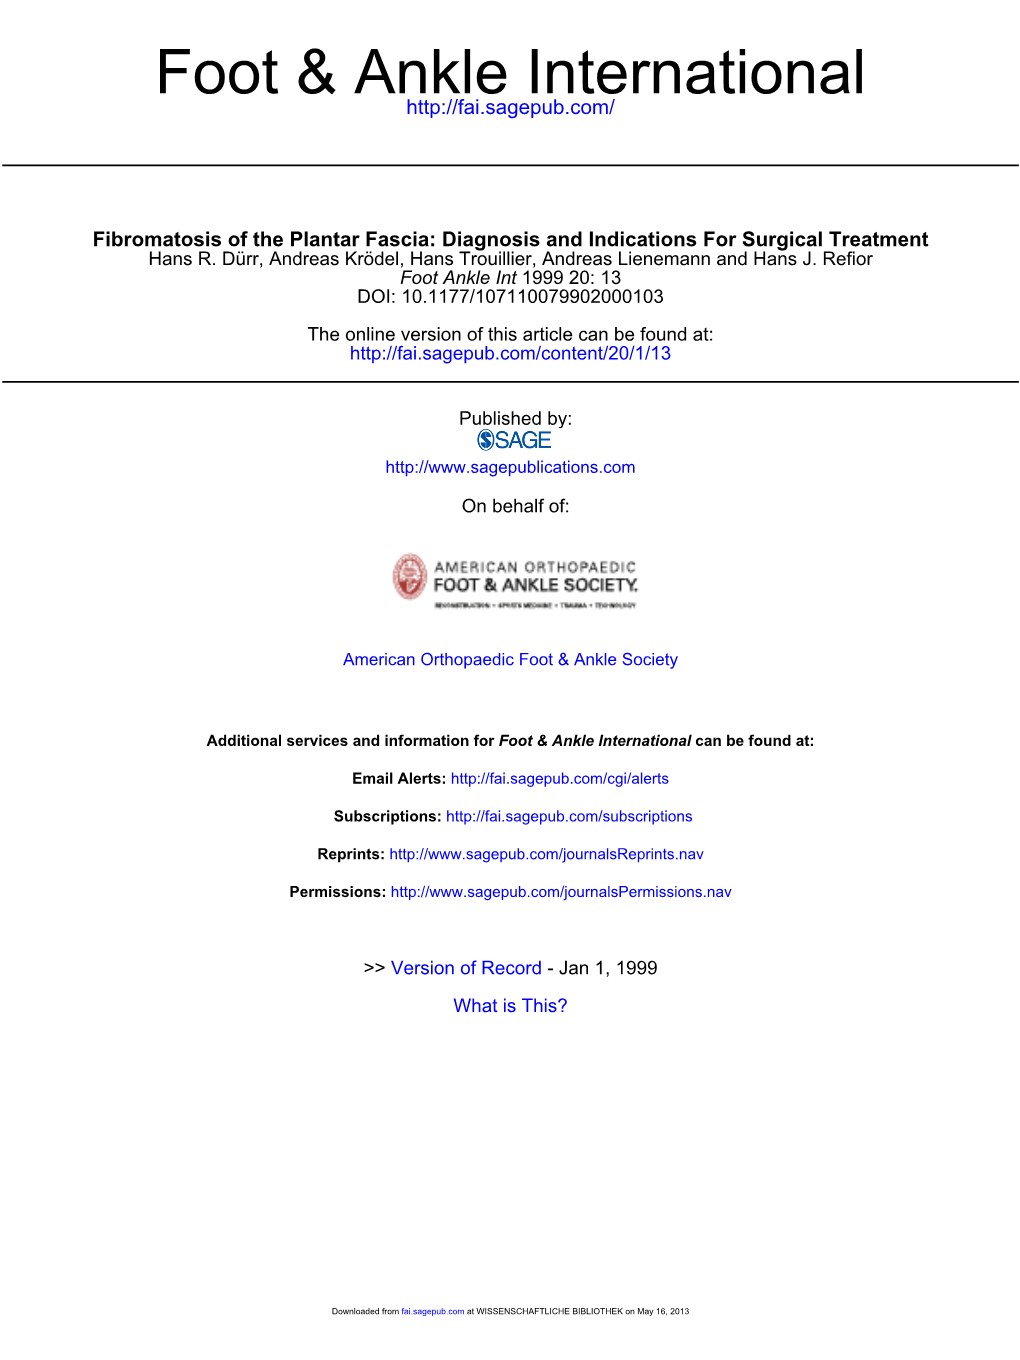 Fibromatosis of the Plantar Fascia: Diagnosis and Indications for Surgical Treatment Hans R